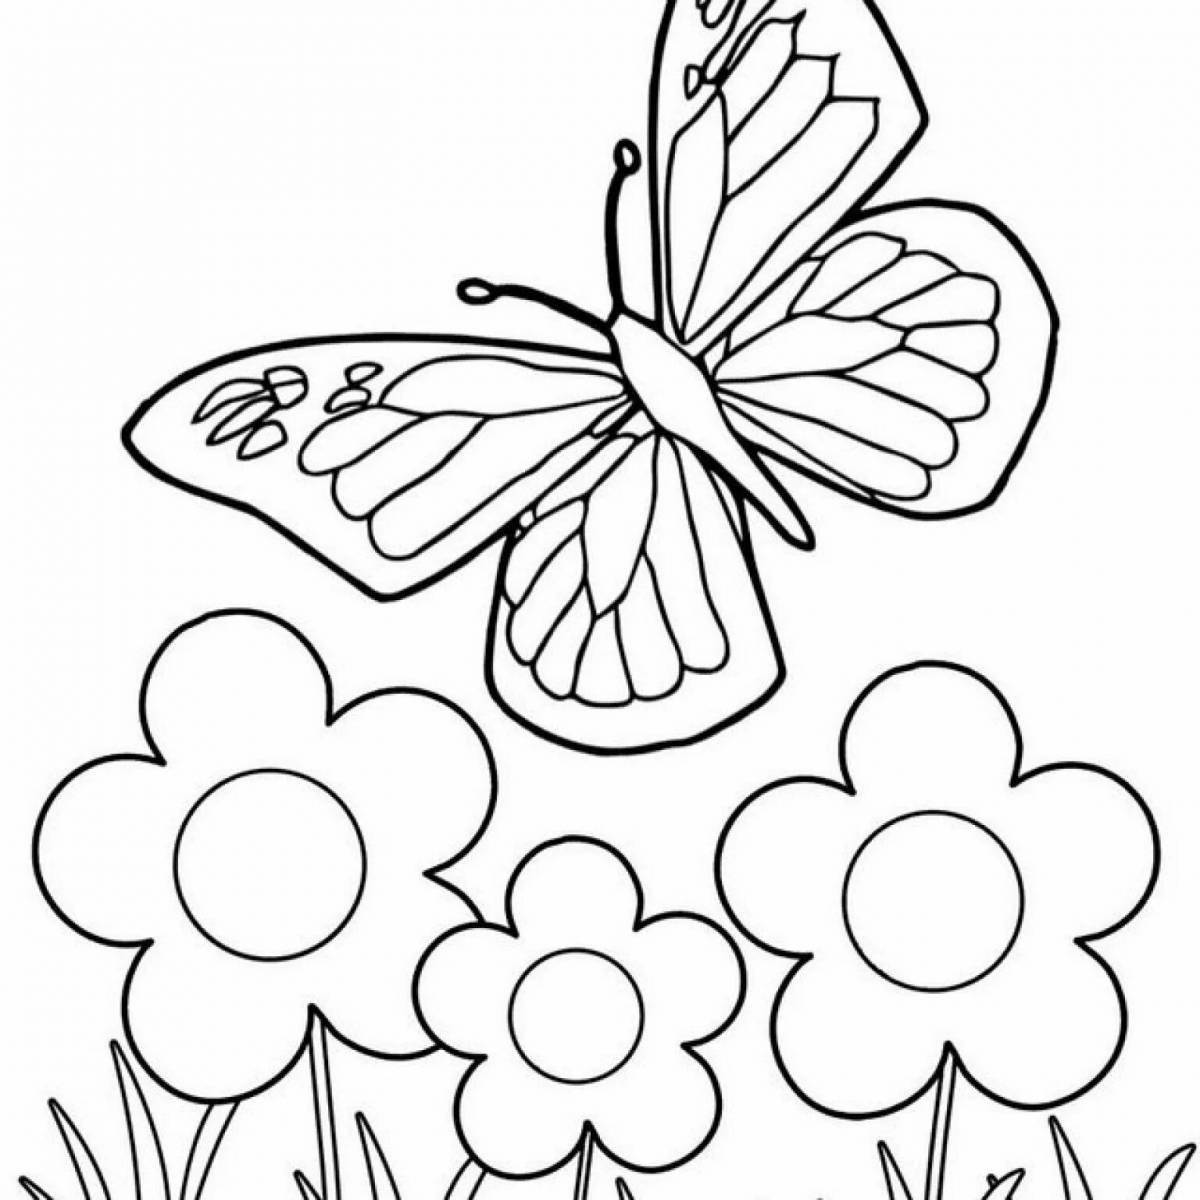 Playful flower coloring book for 5-6 year olds